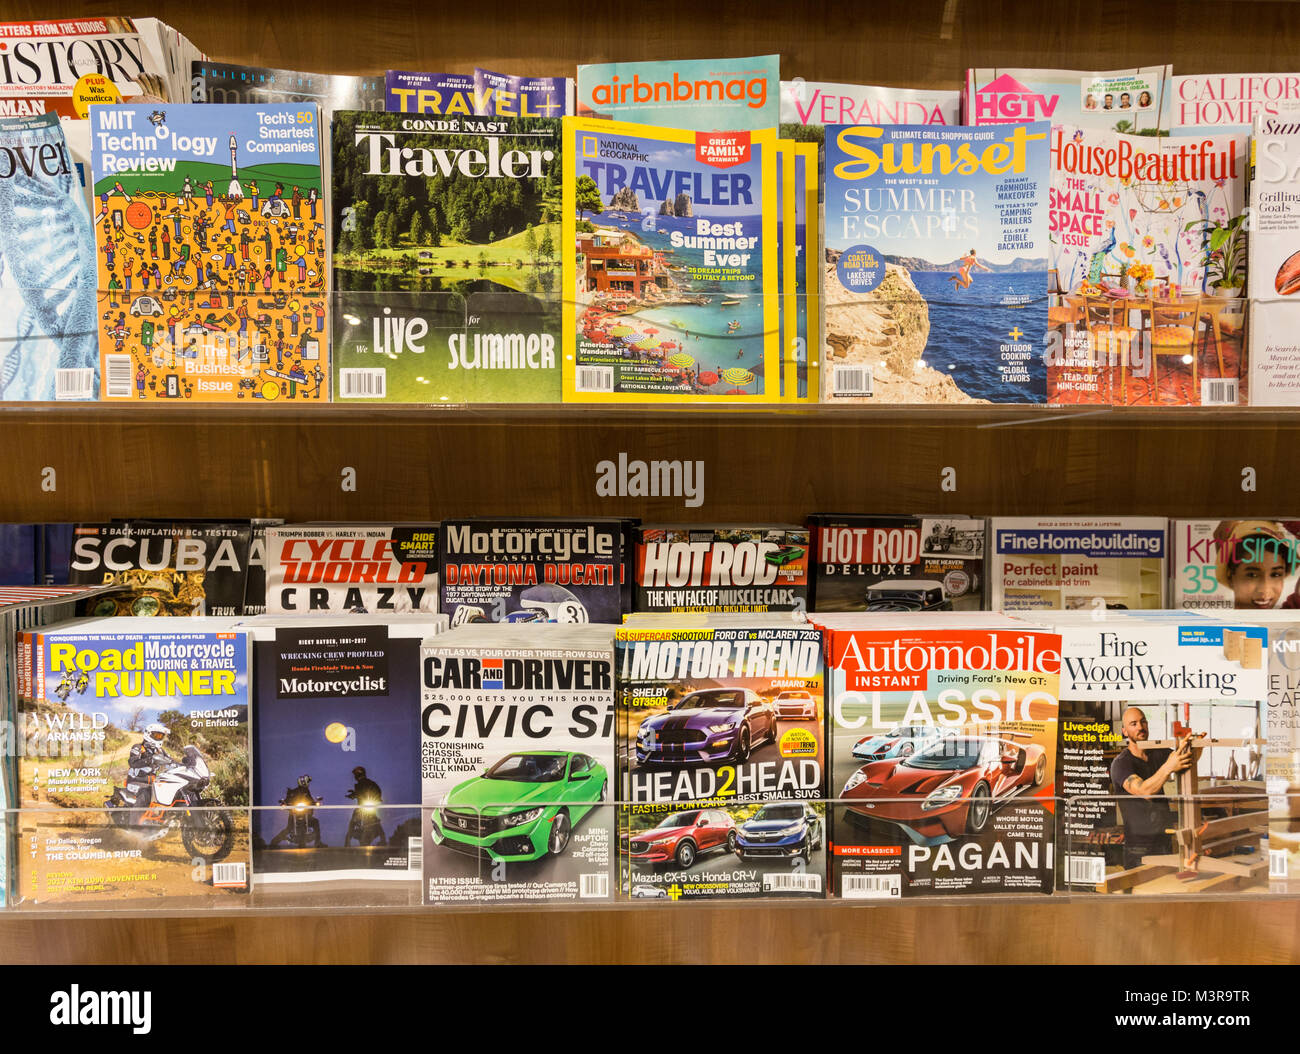 San Francisco, USA - July 2 2017: Magazines of mosty men interest subjects surch as cars, motorcycle and travel are diplayed in the shelf of a booksto Stock Photo